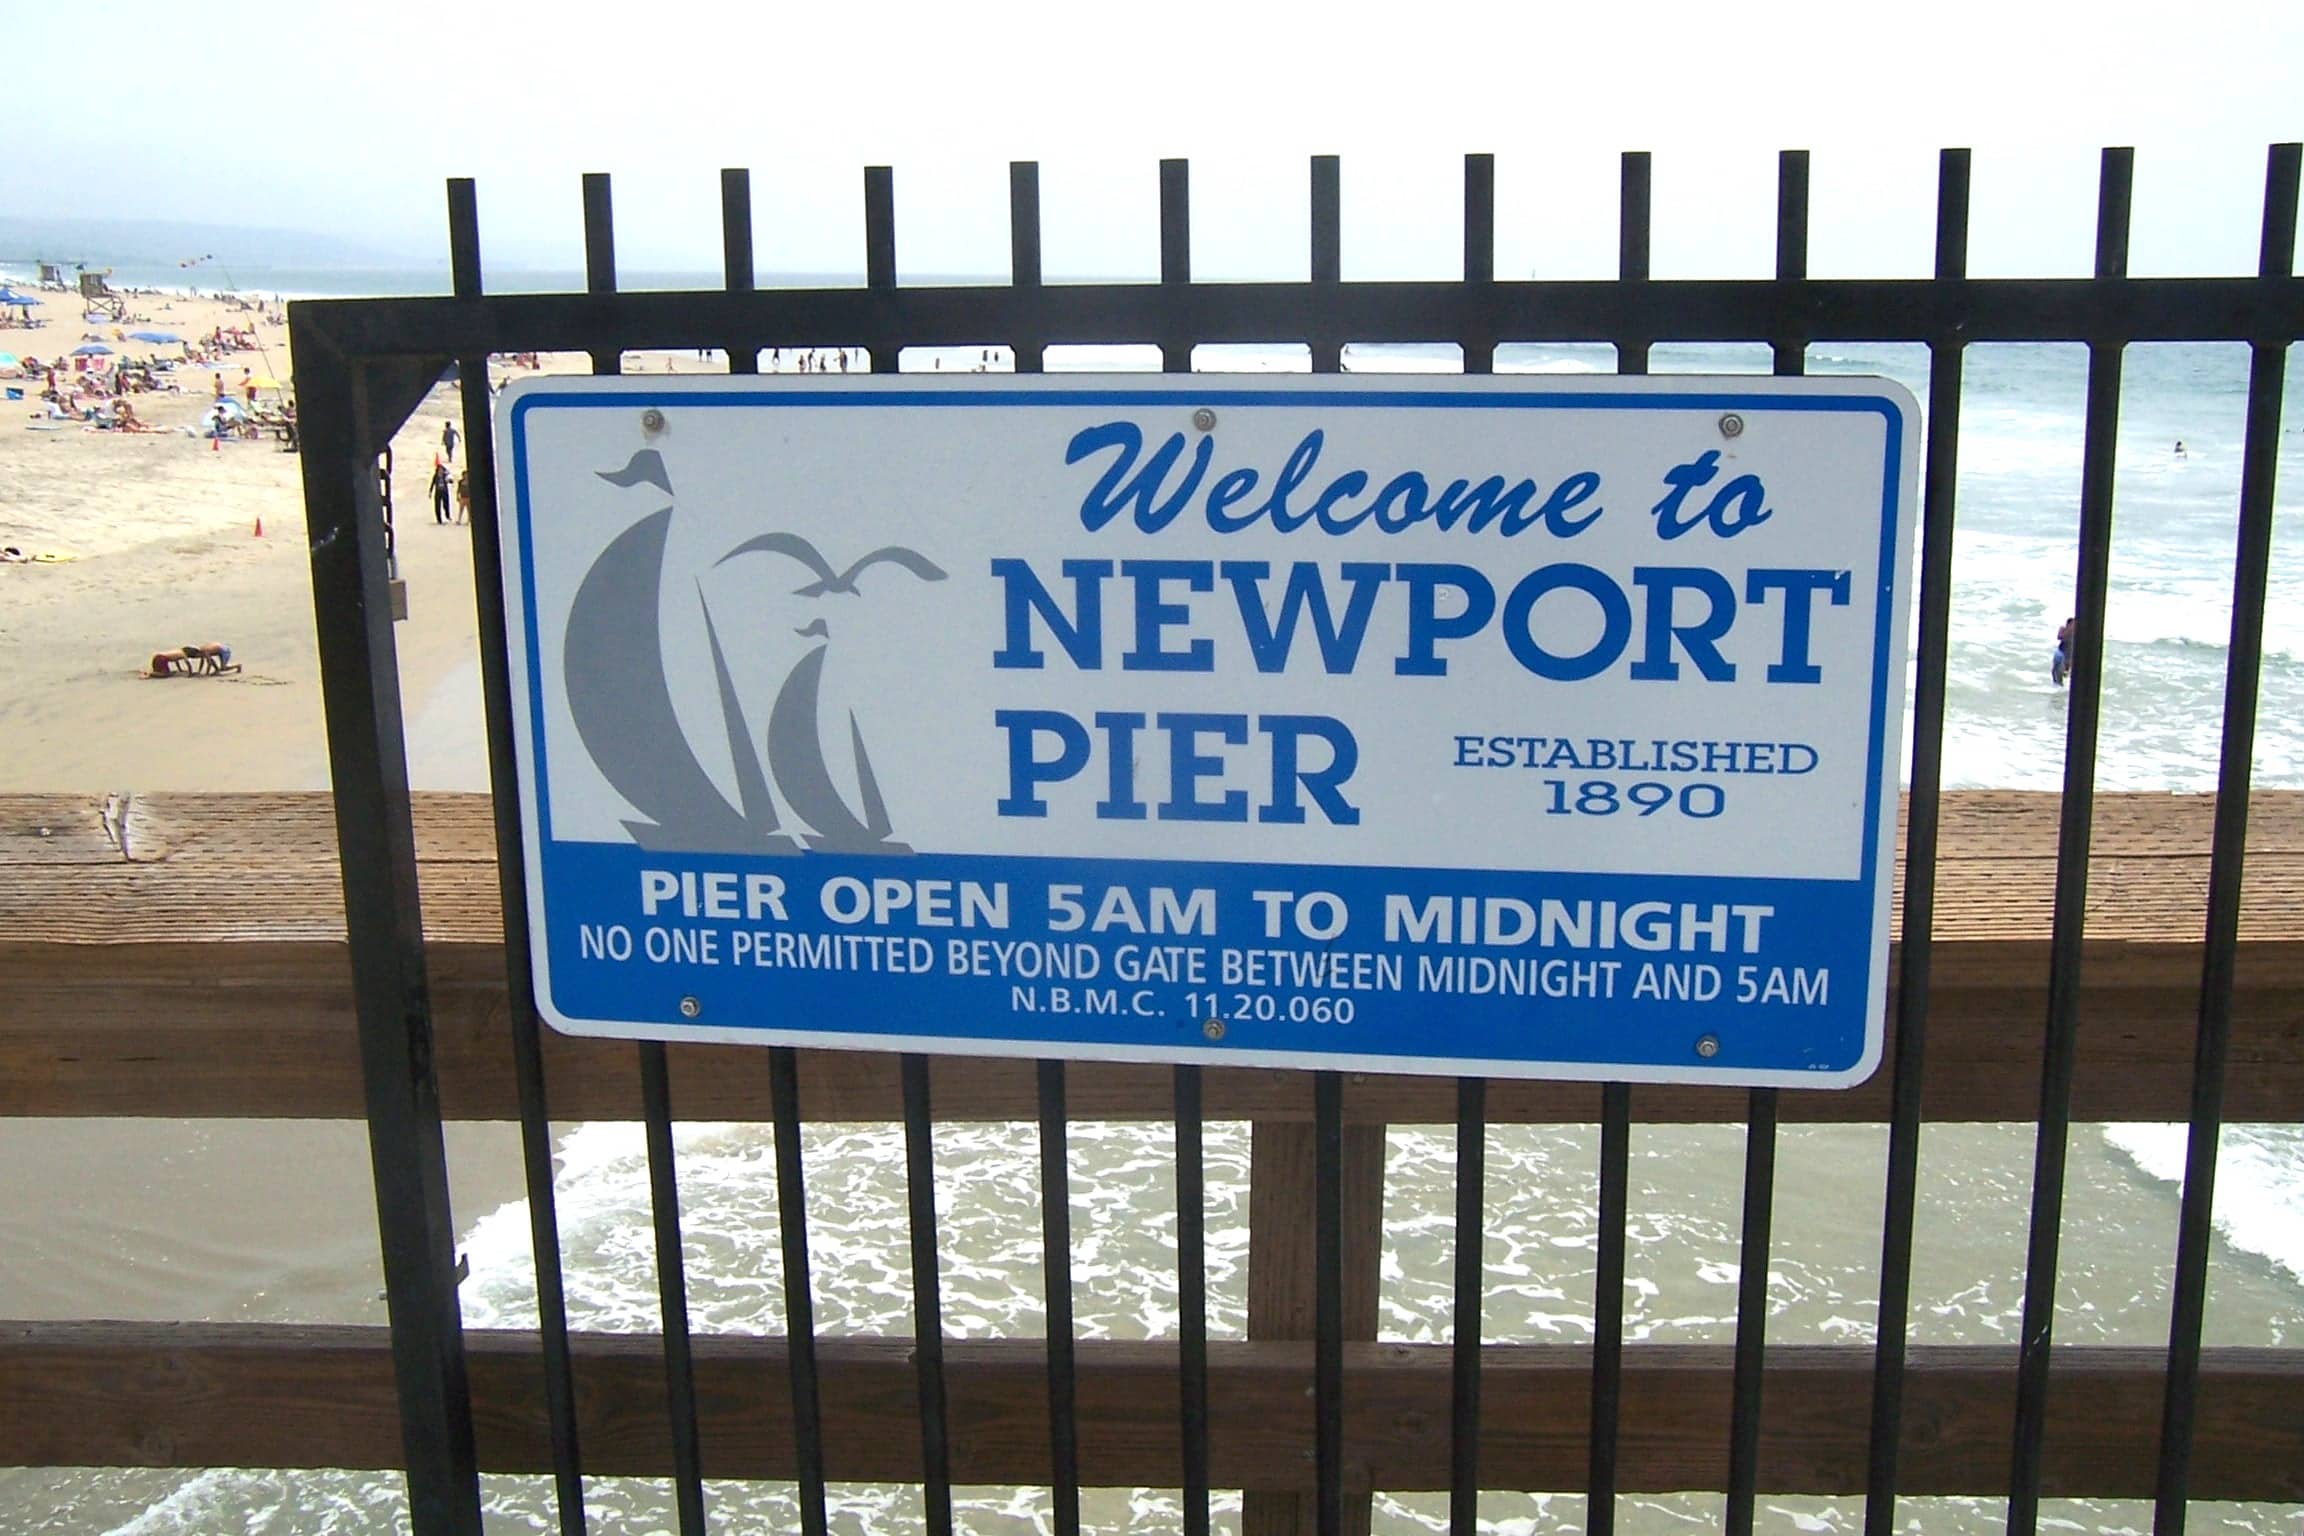 Image from the Newport Beach Pier